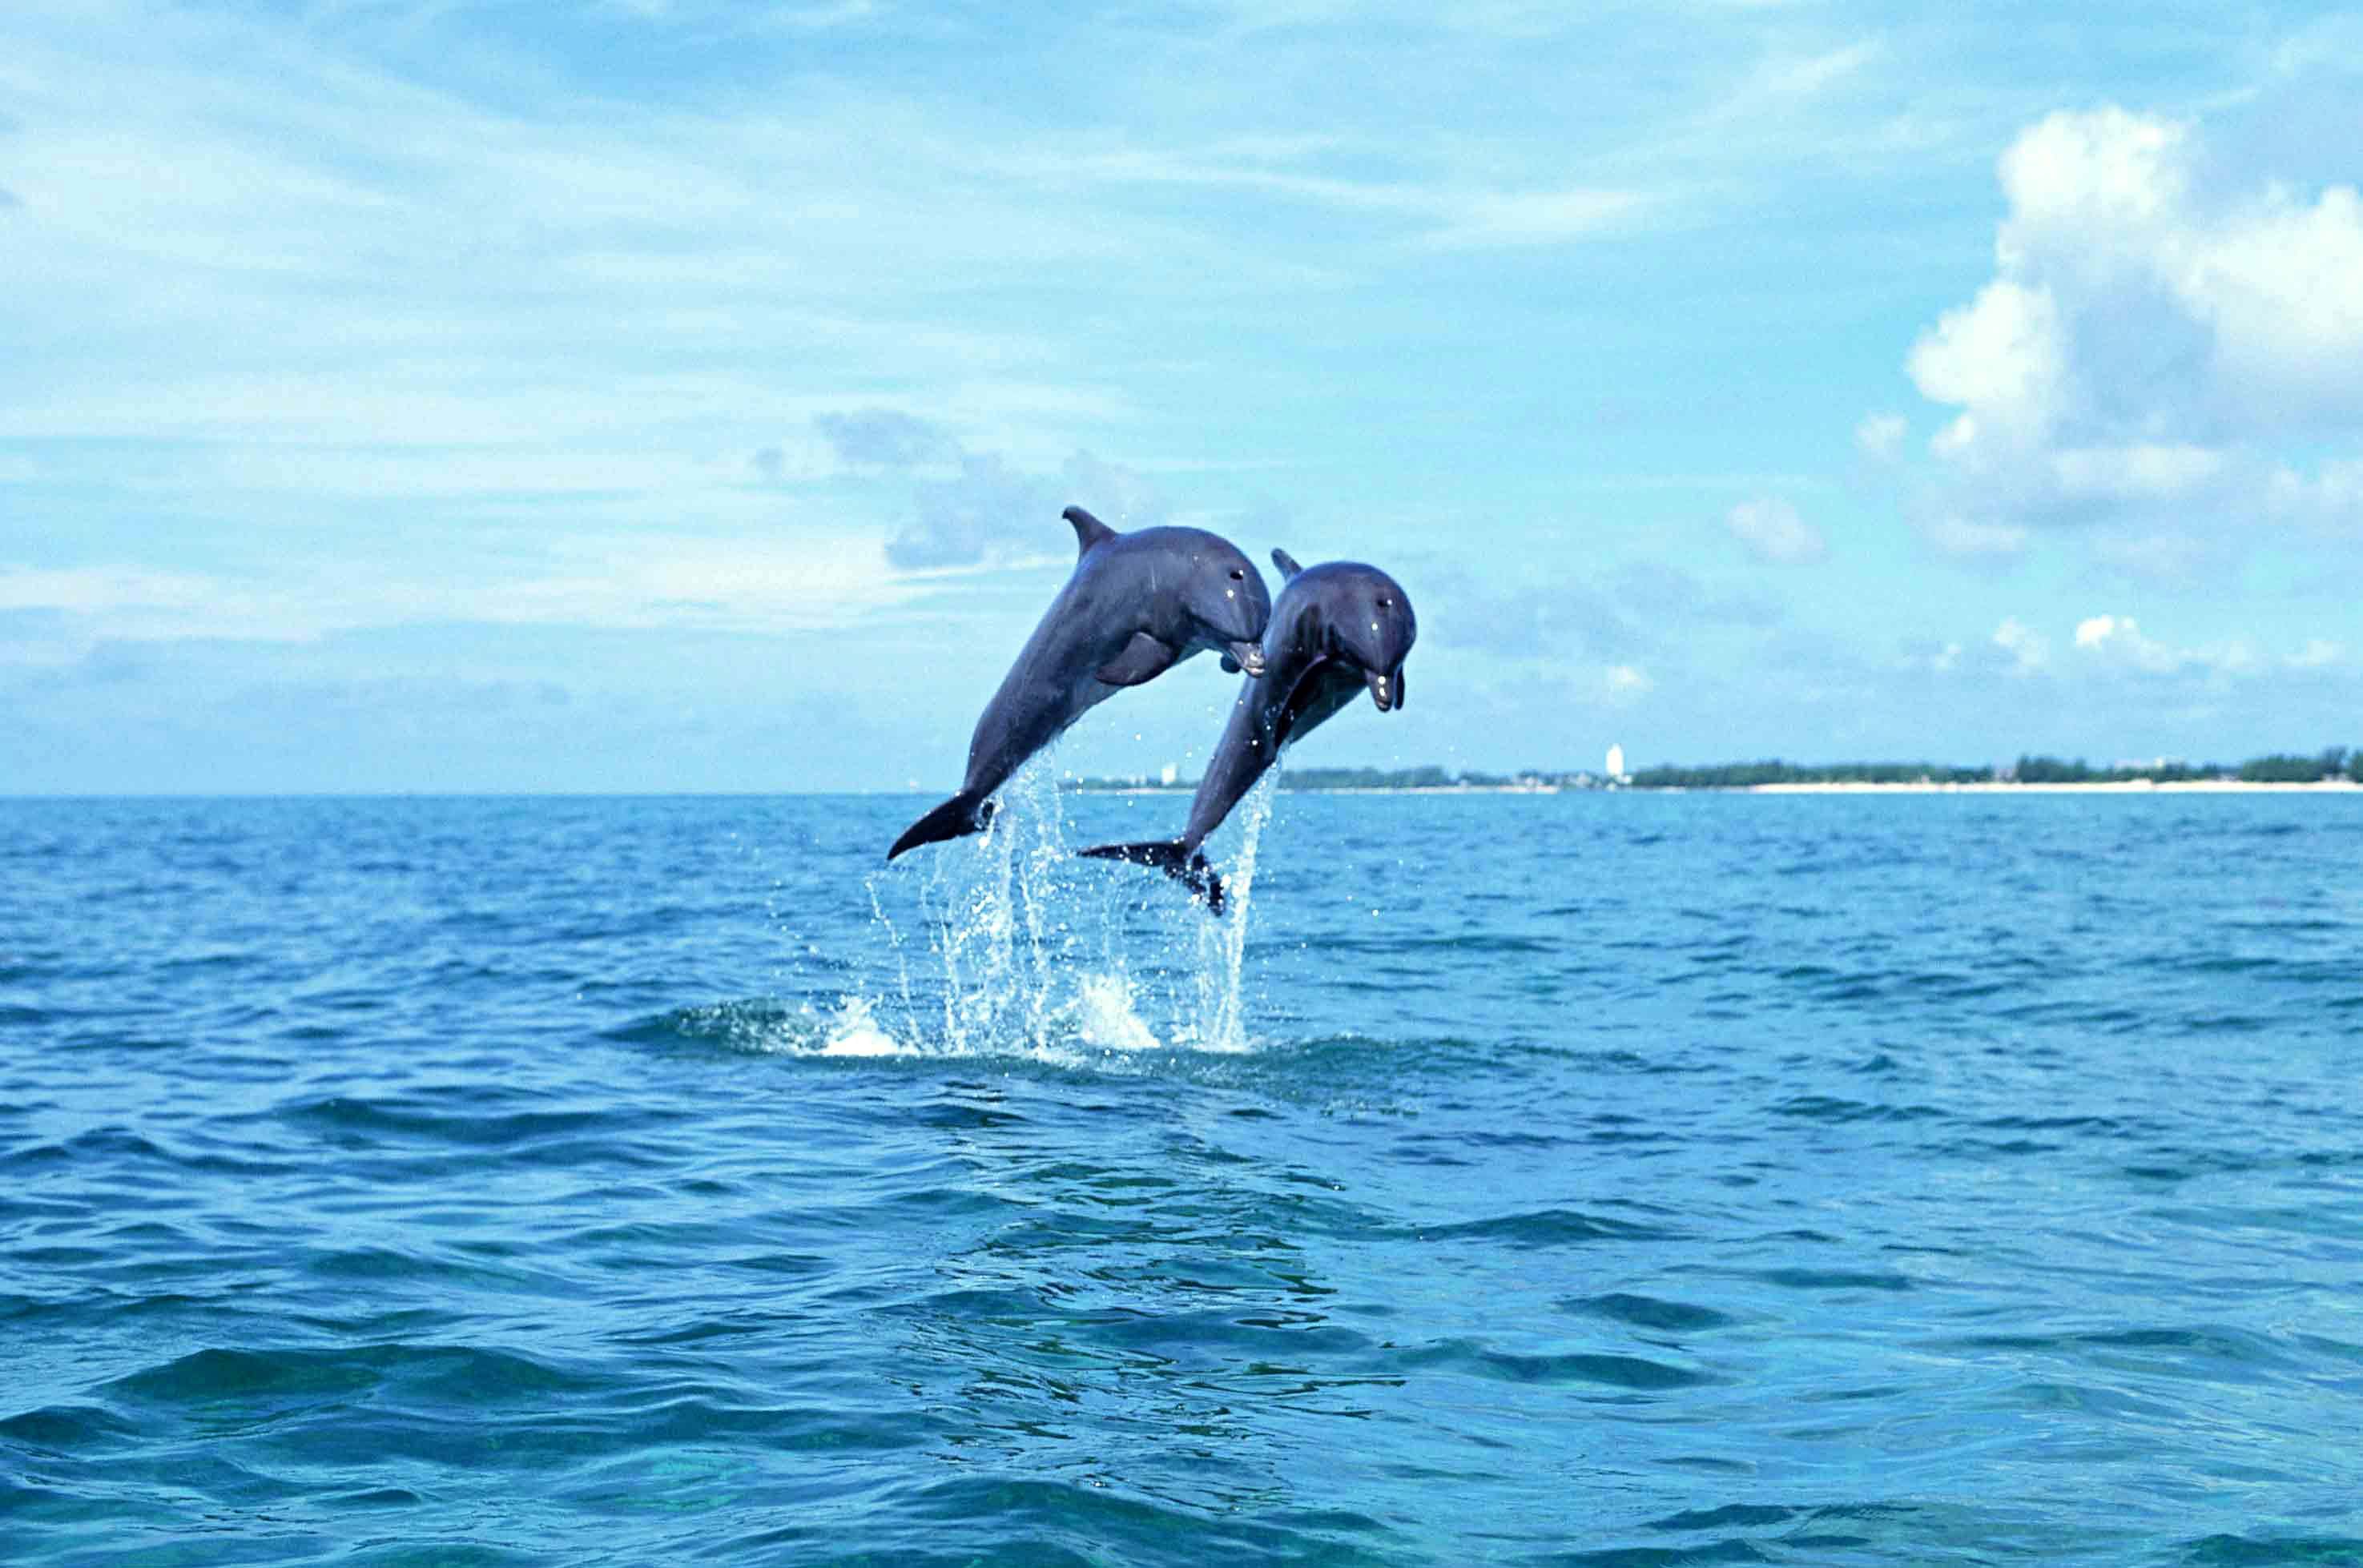 Dolphins jumping wallpaper